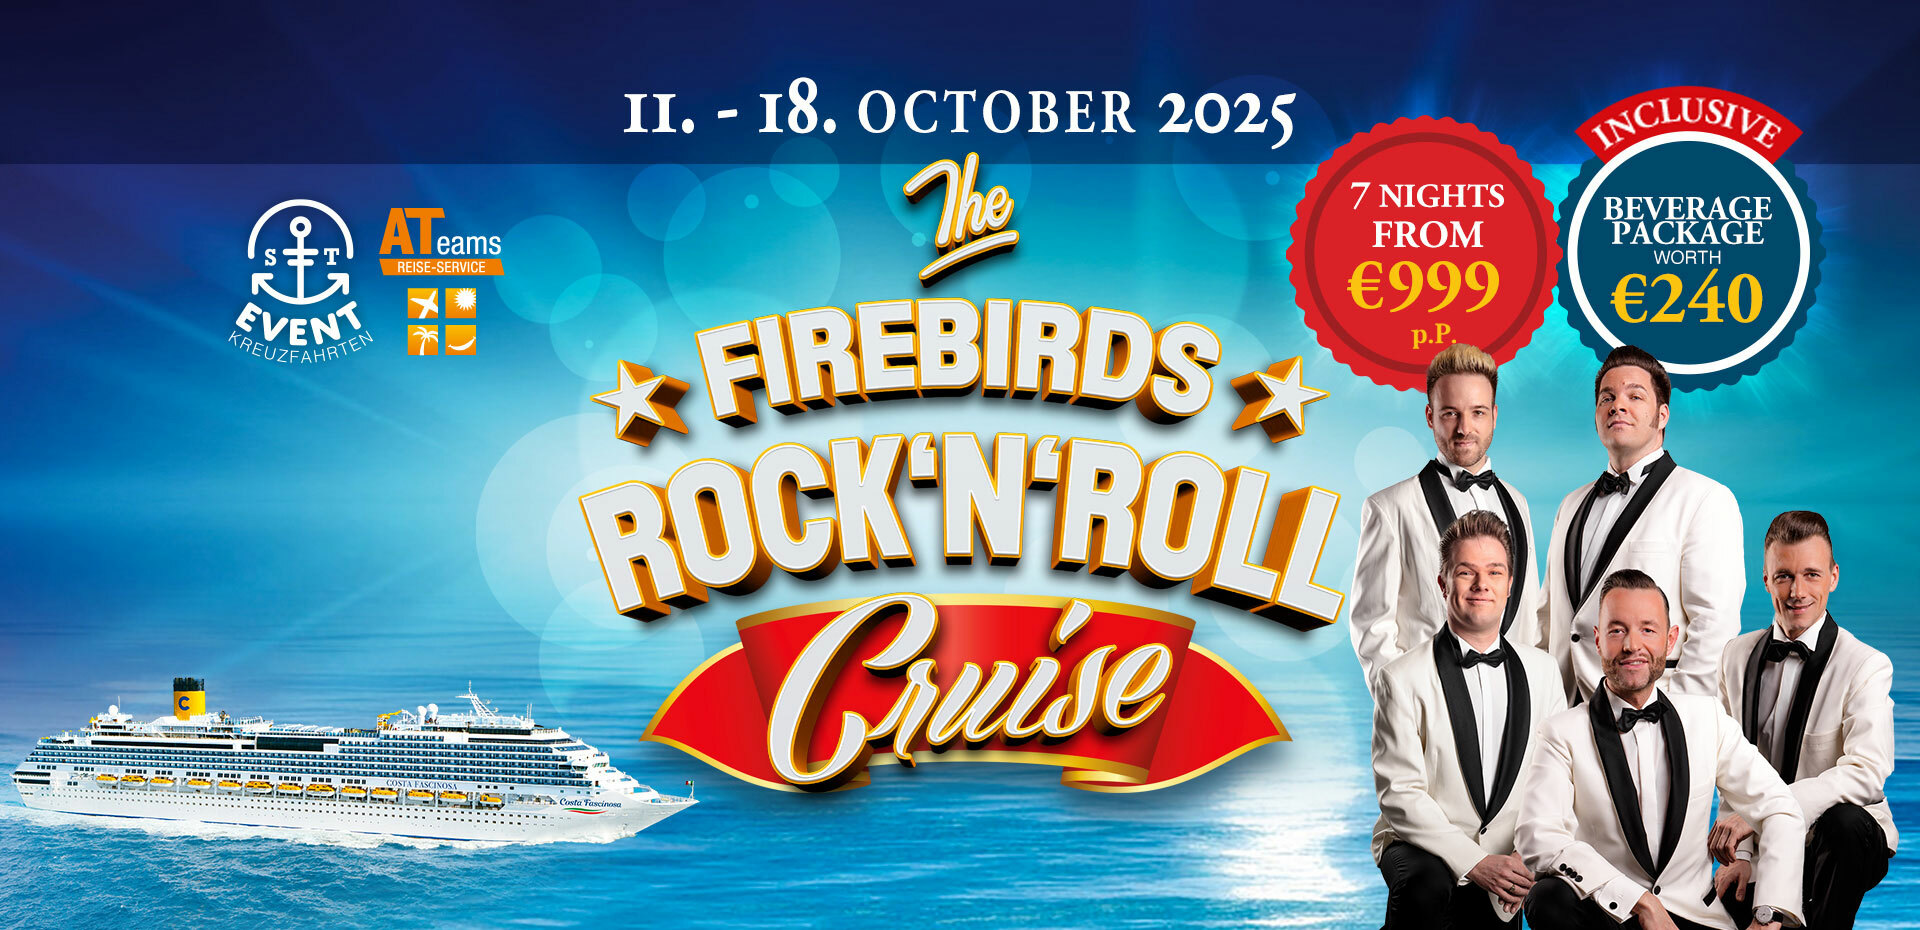 It's time for the next tour - “The Firebirds Rock'n'Roll Cruise”